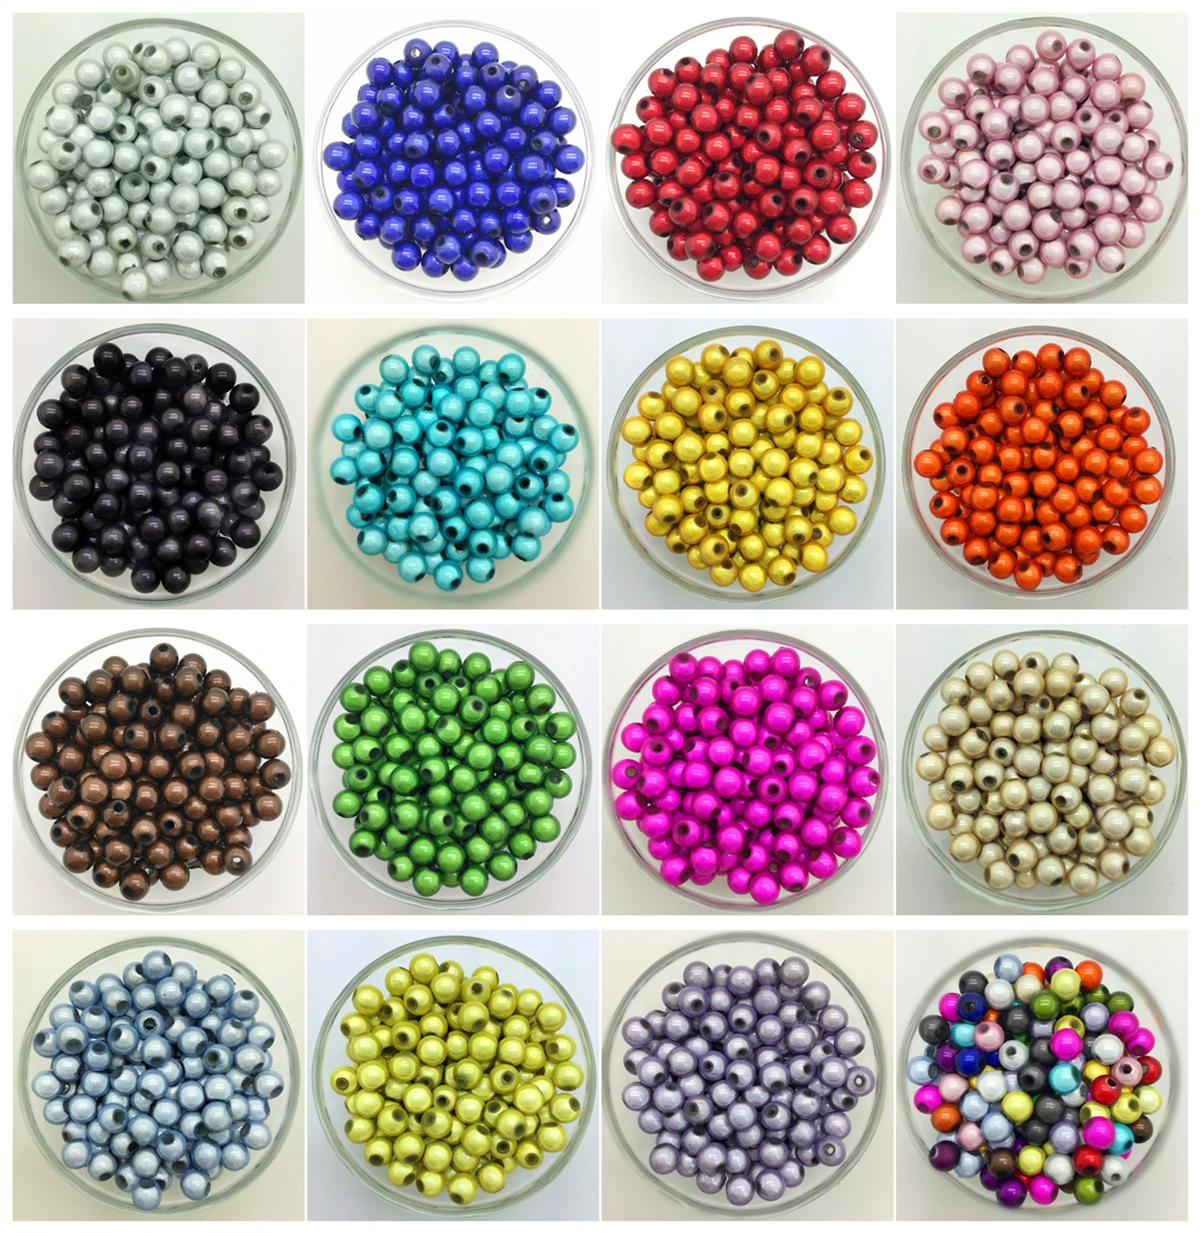 NEW 4mm 6mm 8mm 3D Acrylic Round Pearl Spacer Loose Dream Beads Jewelry Making